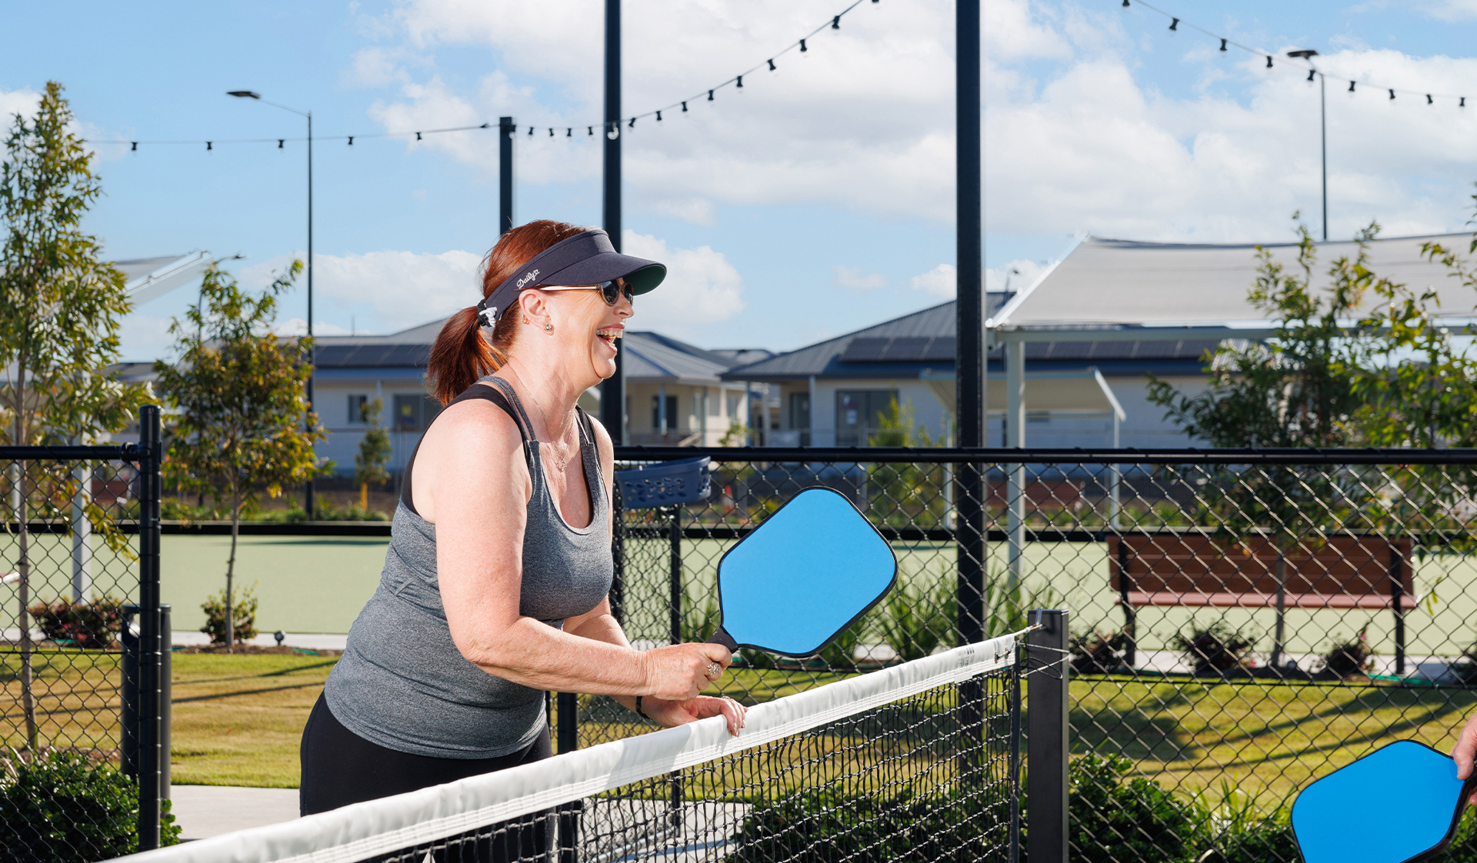 A lady in her 60s holding a pickleball racket at the pickleball court at Halcyon Rise.